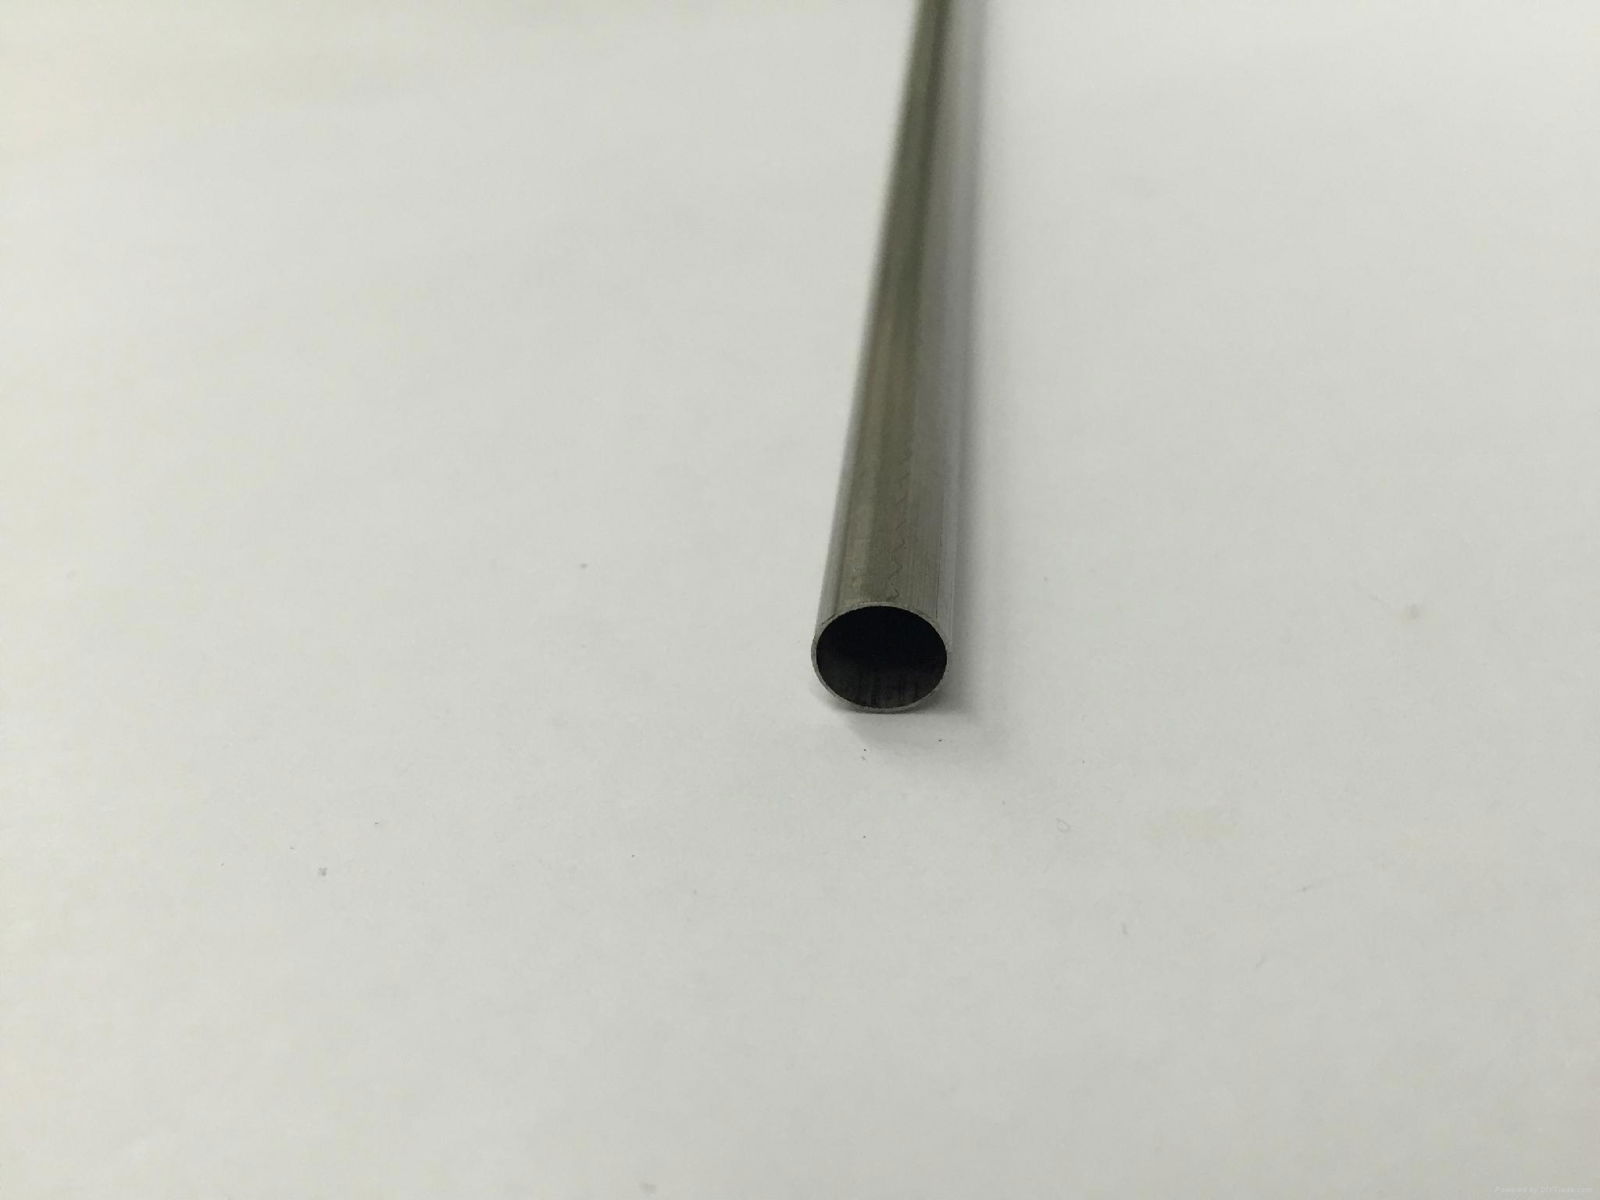  Producer piping stainless steel ASTM A312 grade 316L 12.7*1mm 2